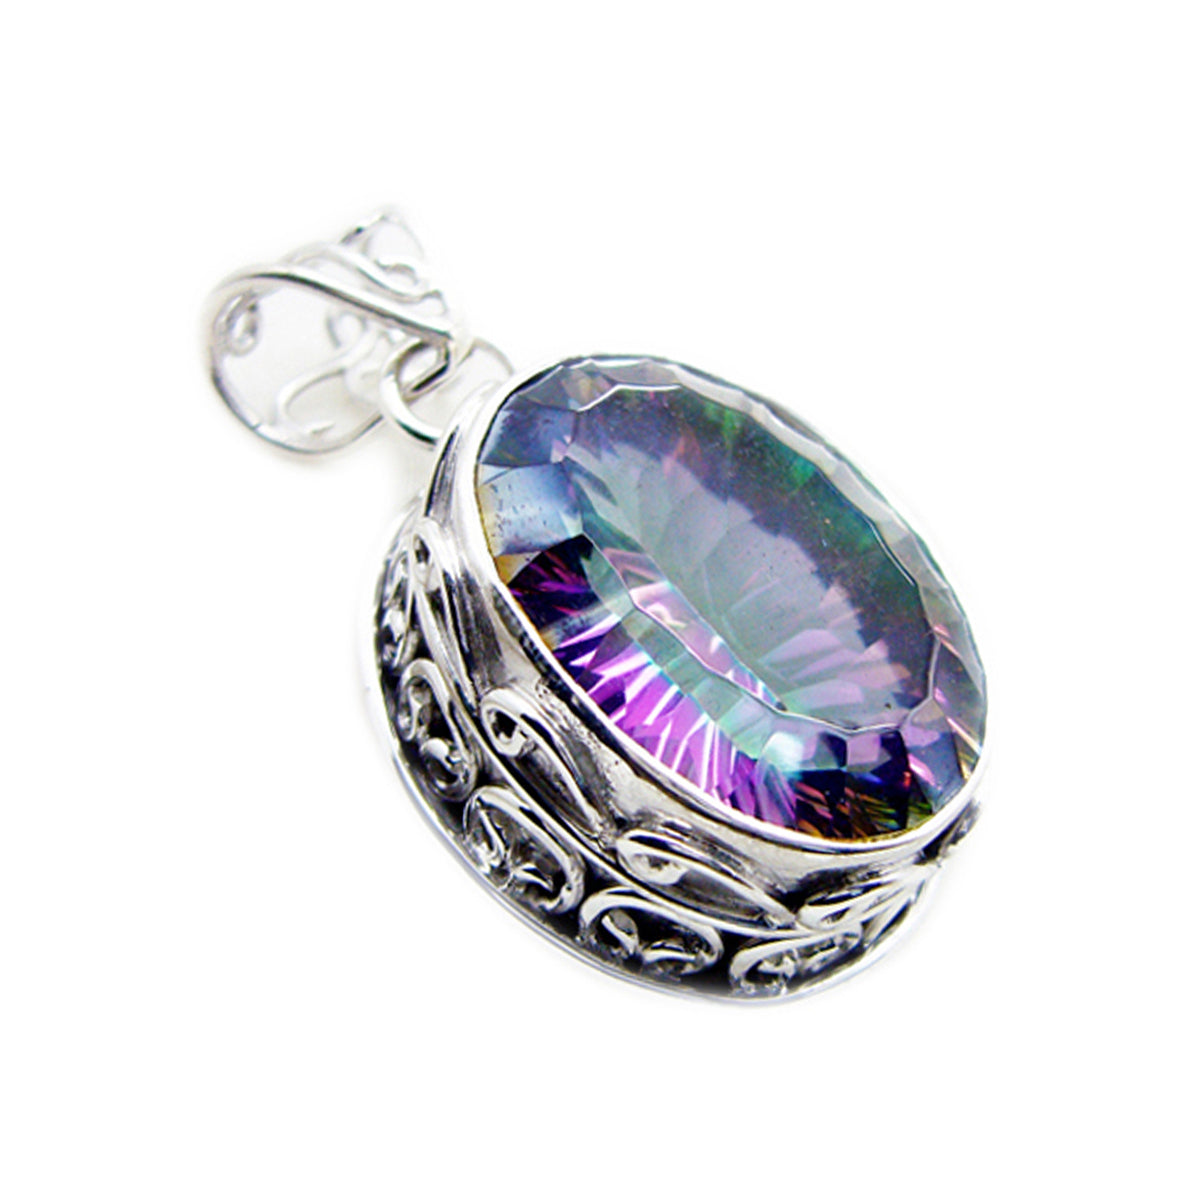 Riyo Beauteous Gems Oval Faceted Multi Color Mystic Quartz Solid Silver Pendant Gift For Wedding